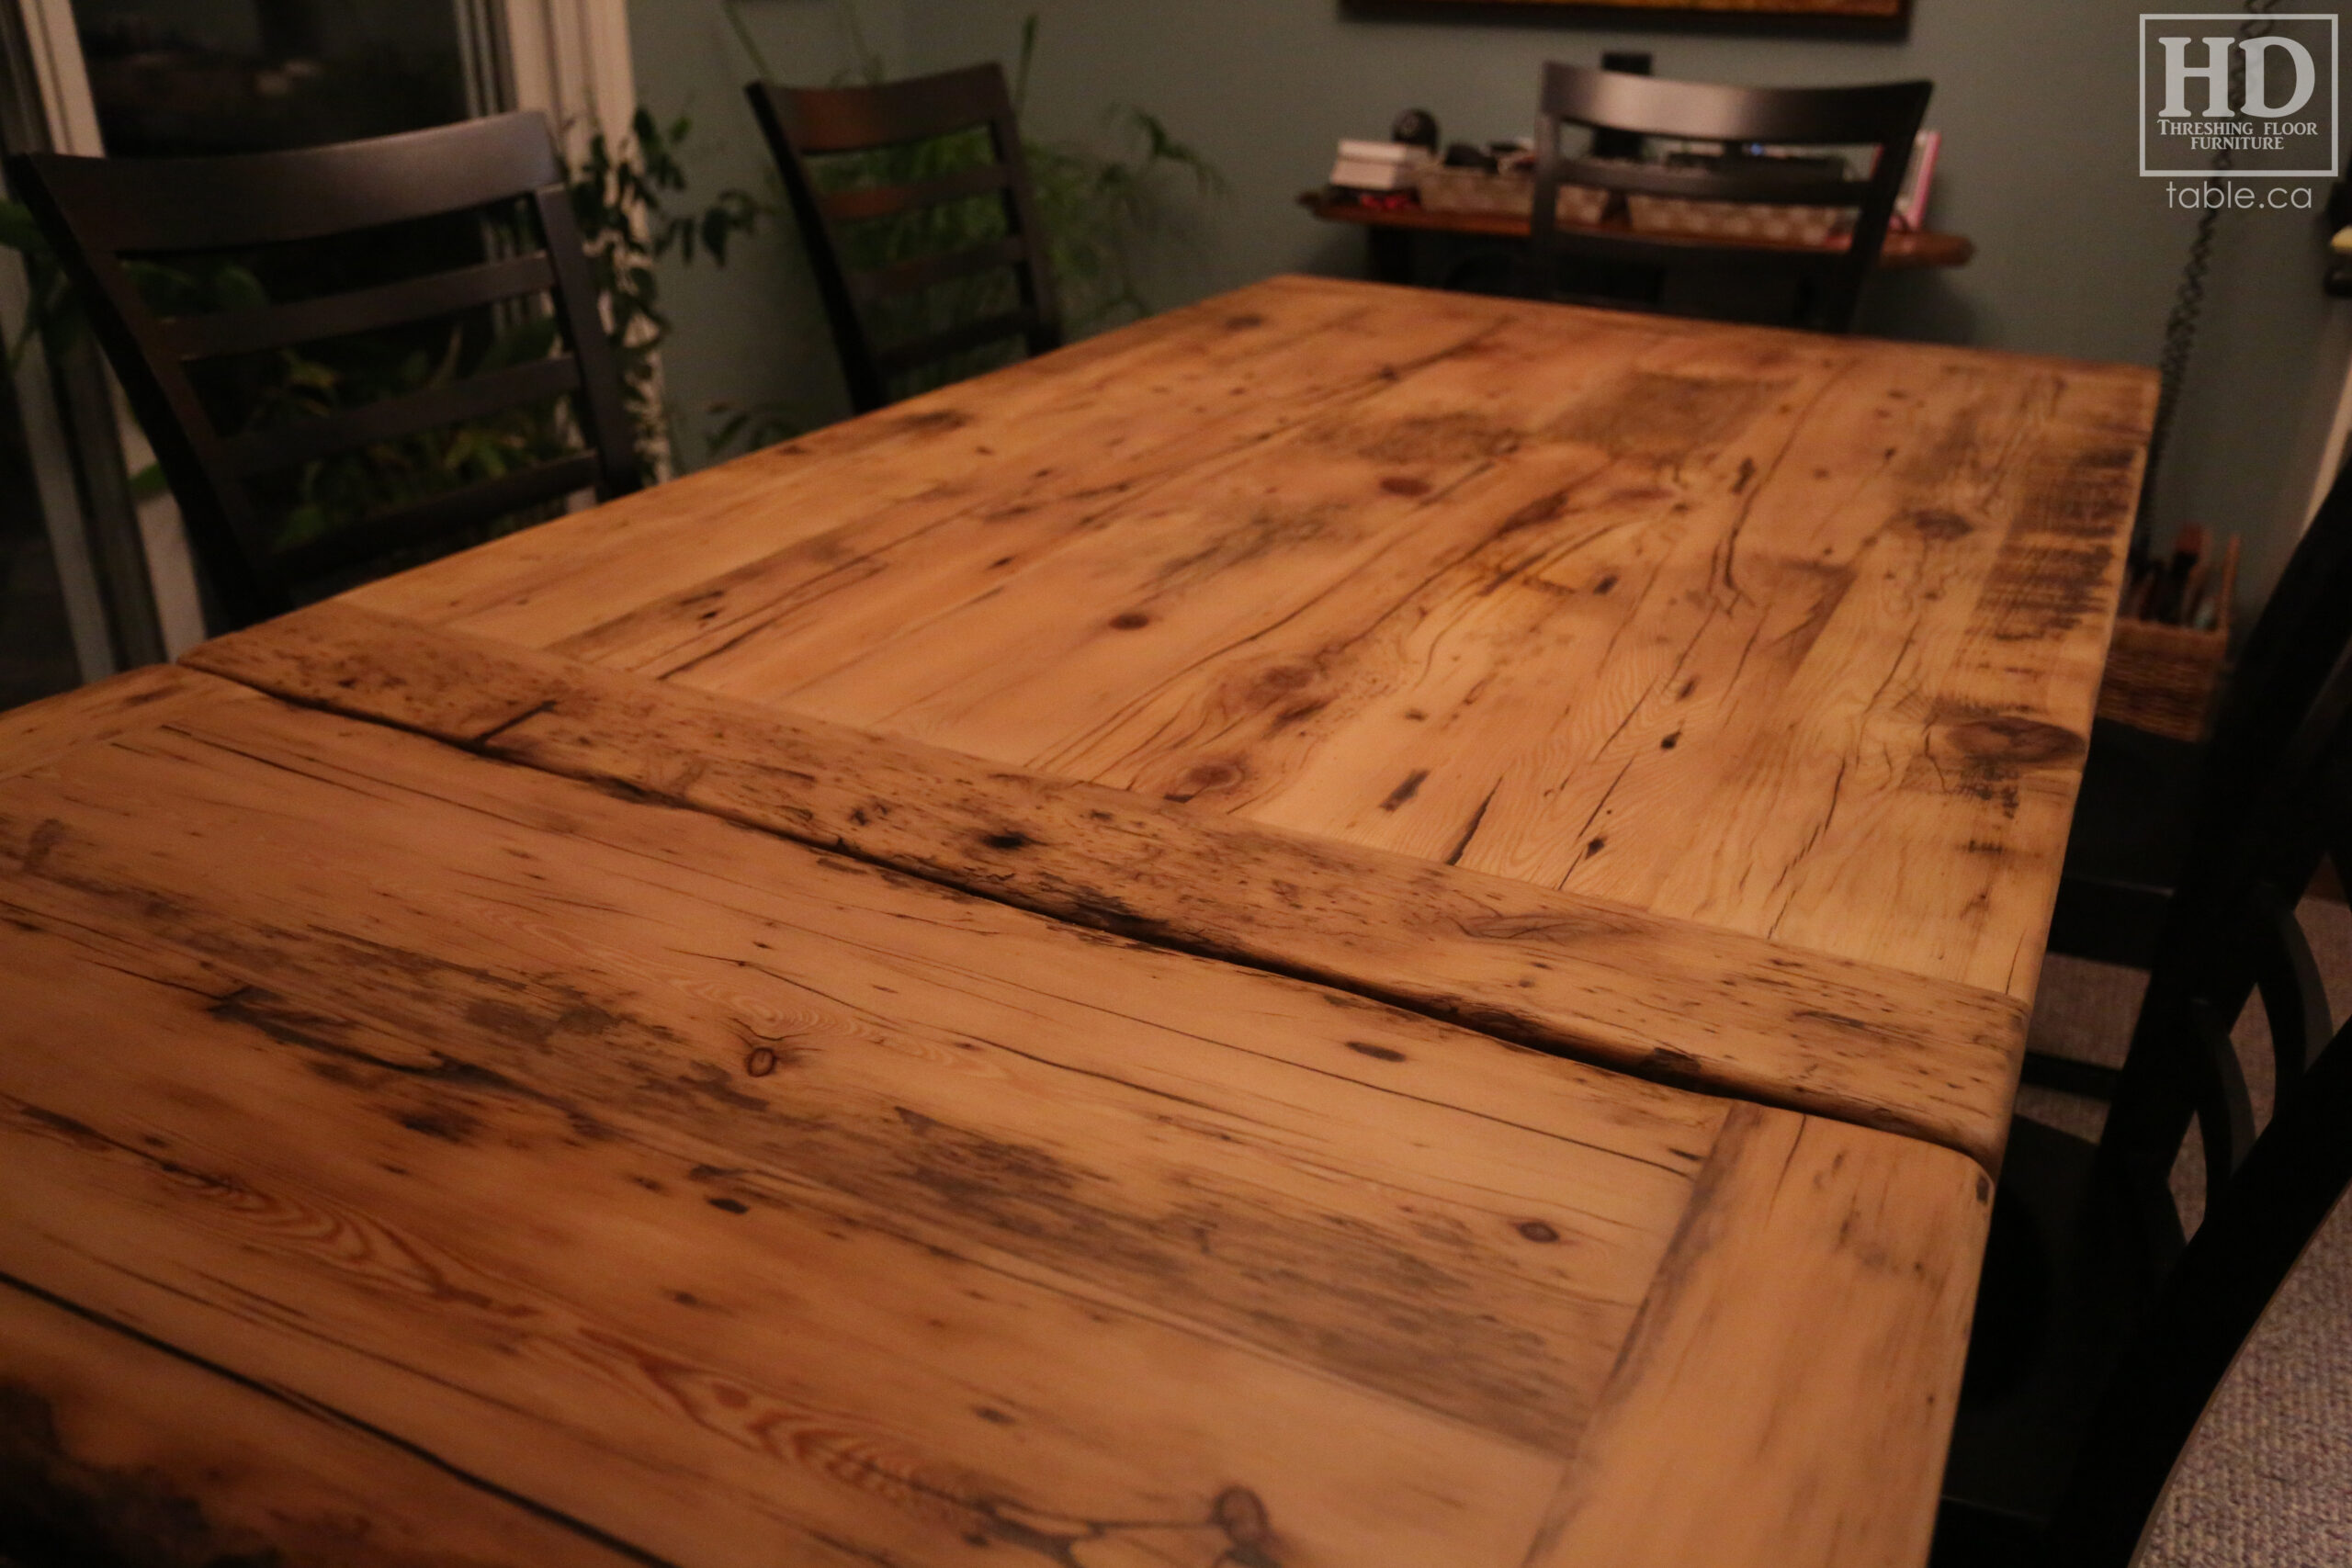 Custom Reclaimed Wood Table with Epoxy Finish by HD Threshing Floor Furniture / www.table.ca